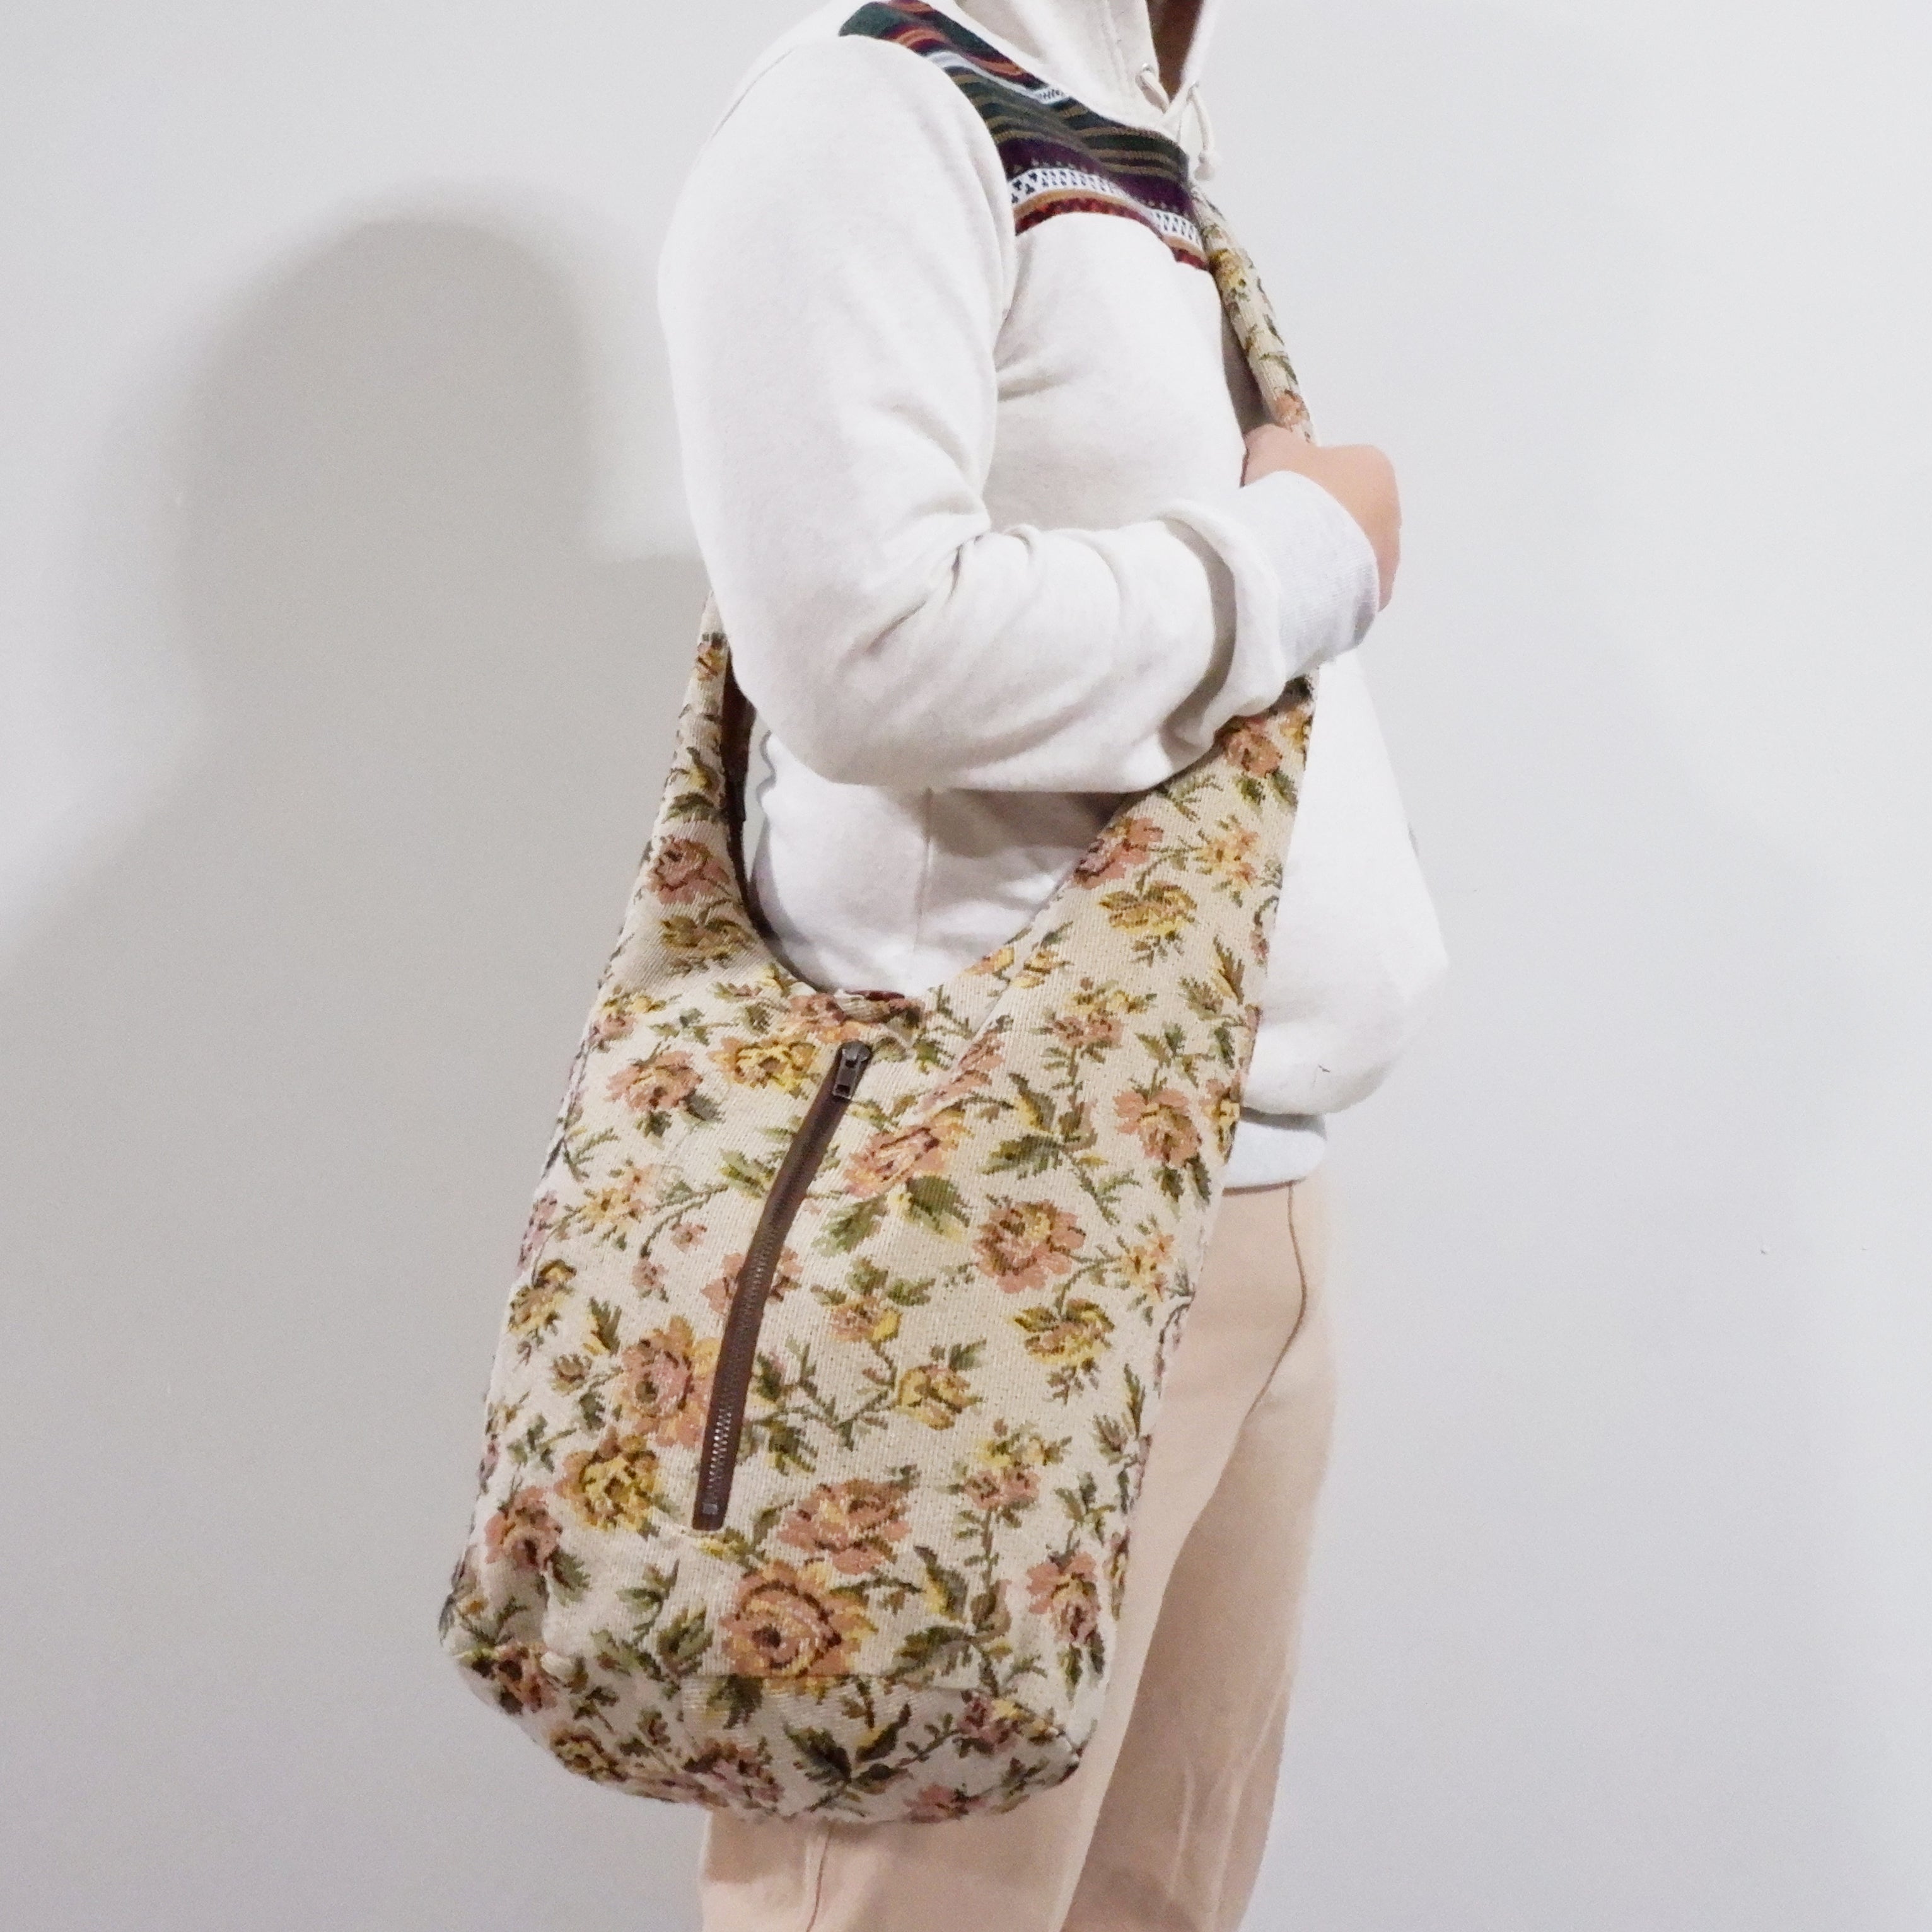 Durable Tapestry Floral Crossbody Bag - Style and Function Combined - hippiealley